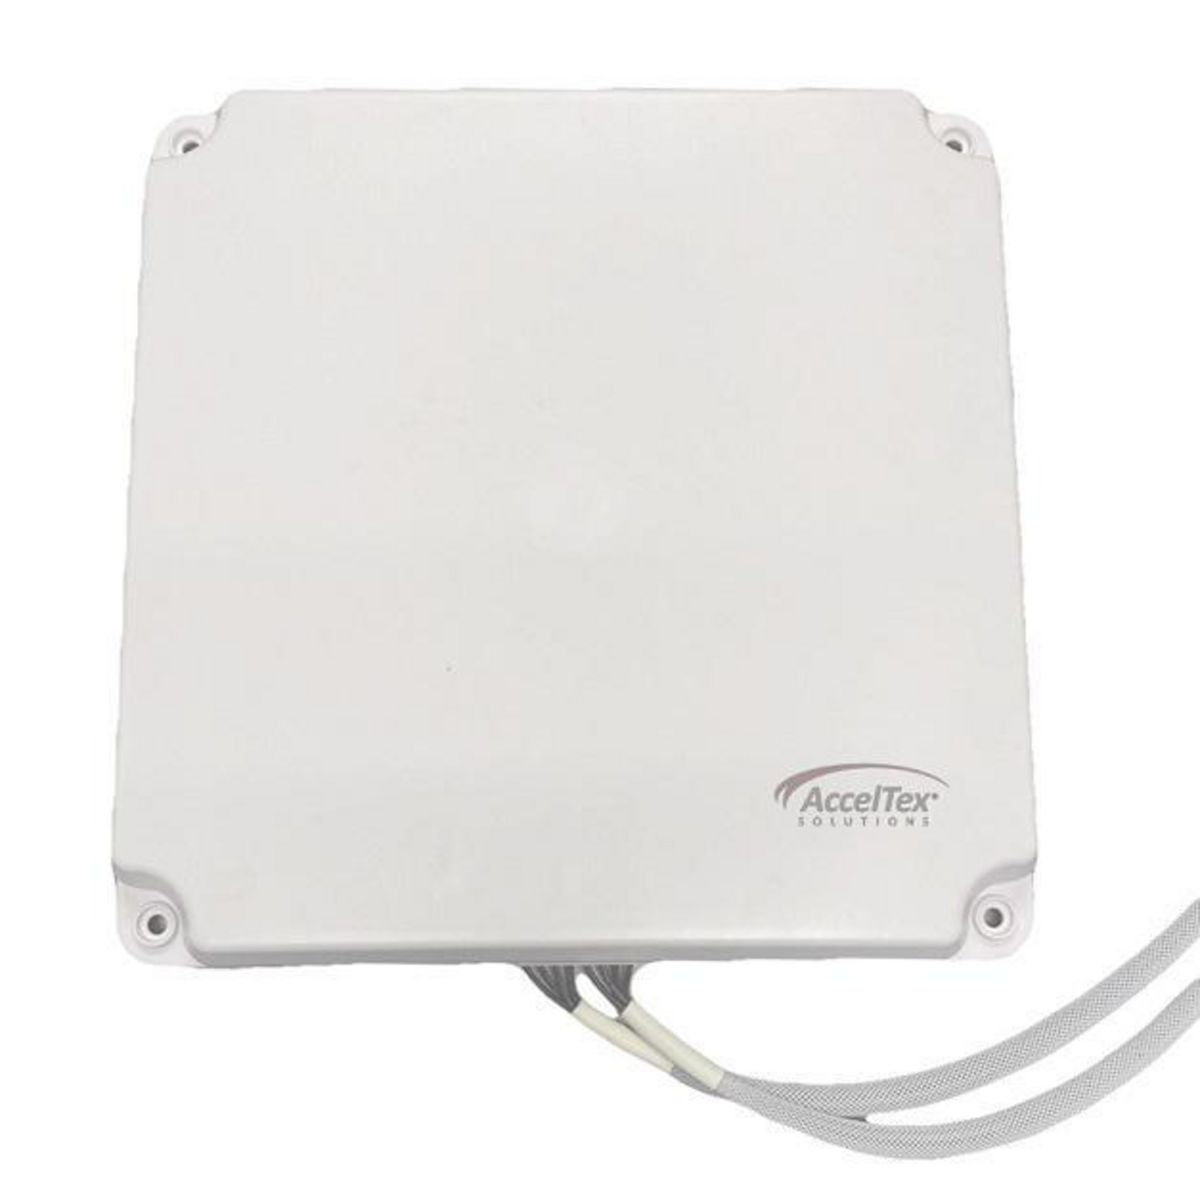 2.4/5/6 GHz 7 dBi 8 Element Indoor/Outdoor Patch Antenna with 